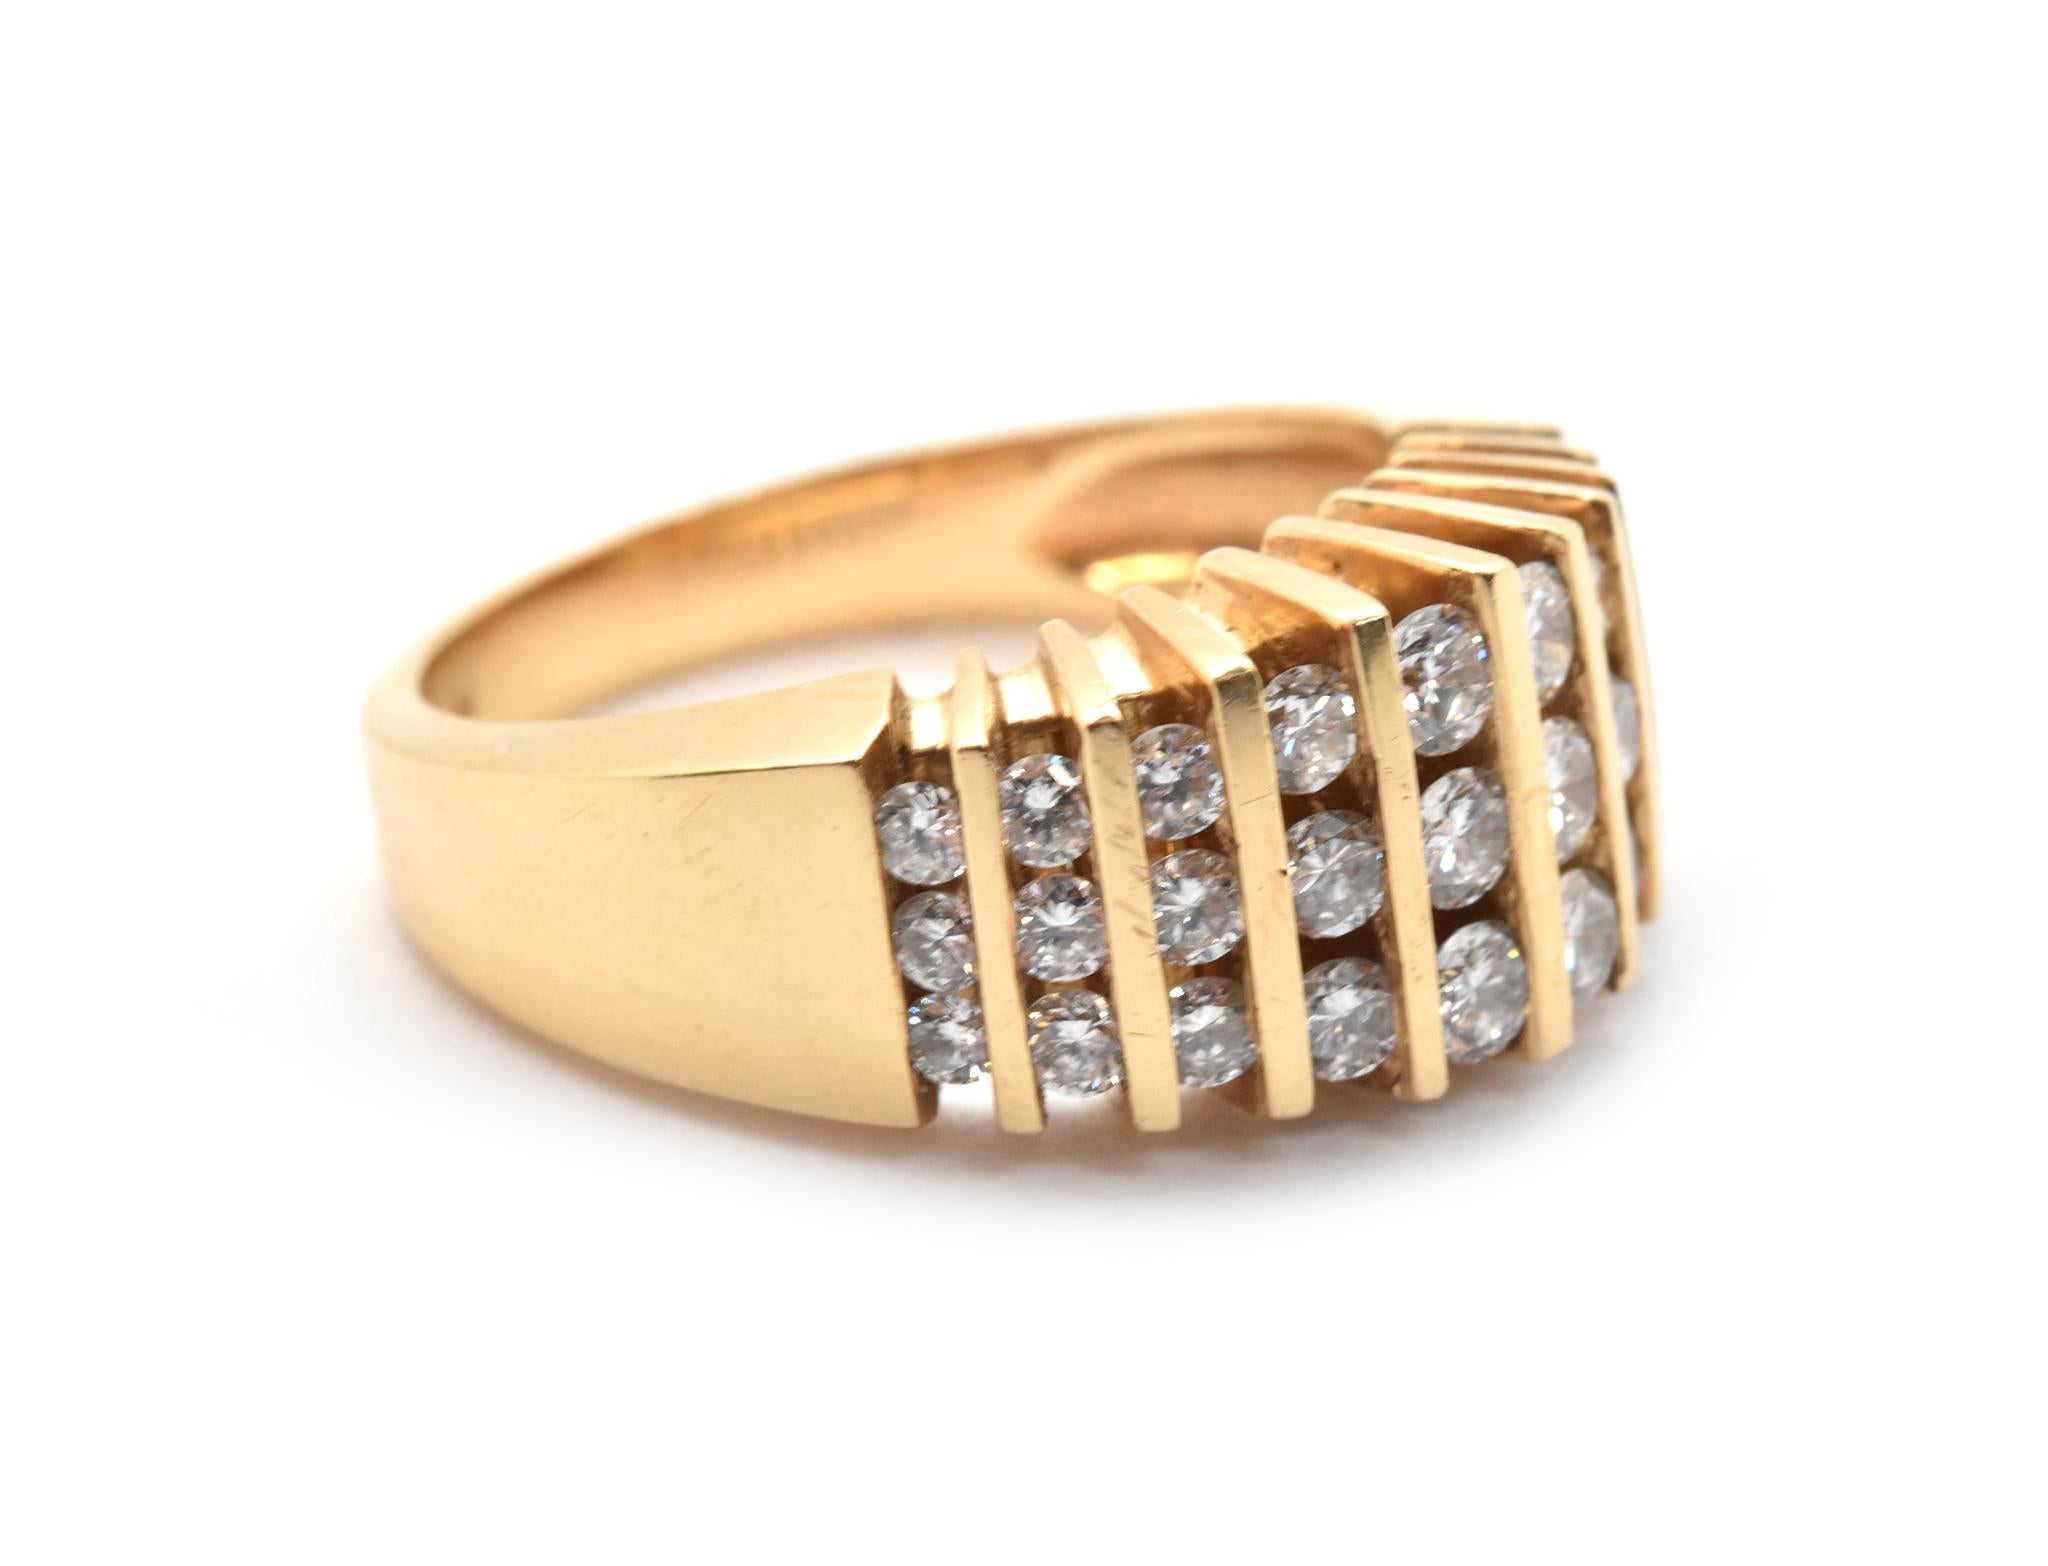 This ring is made in solid 14k yellow gold, and the face of the ring holds 10 rows of round diamonds. The diamonds have a total weight of 0.75 carats, and they are graded G-H in color and SI in clarity. The ring measures 9mm wide. The ring weighs